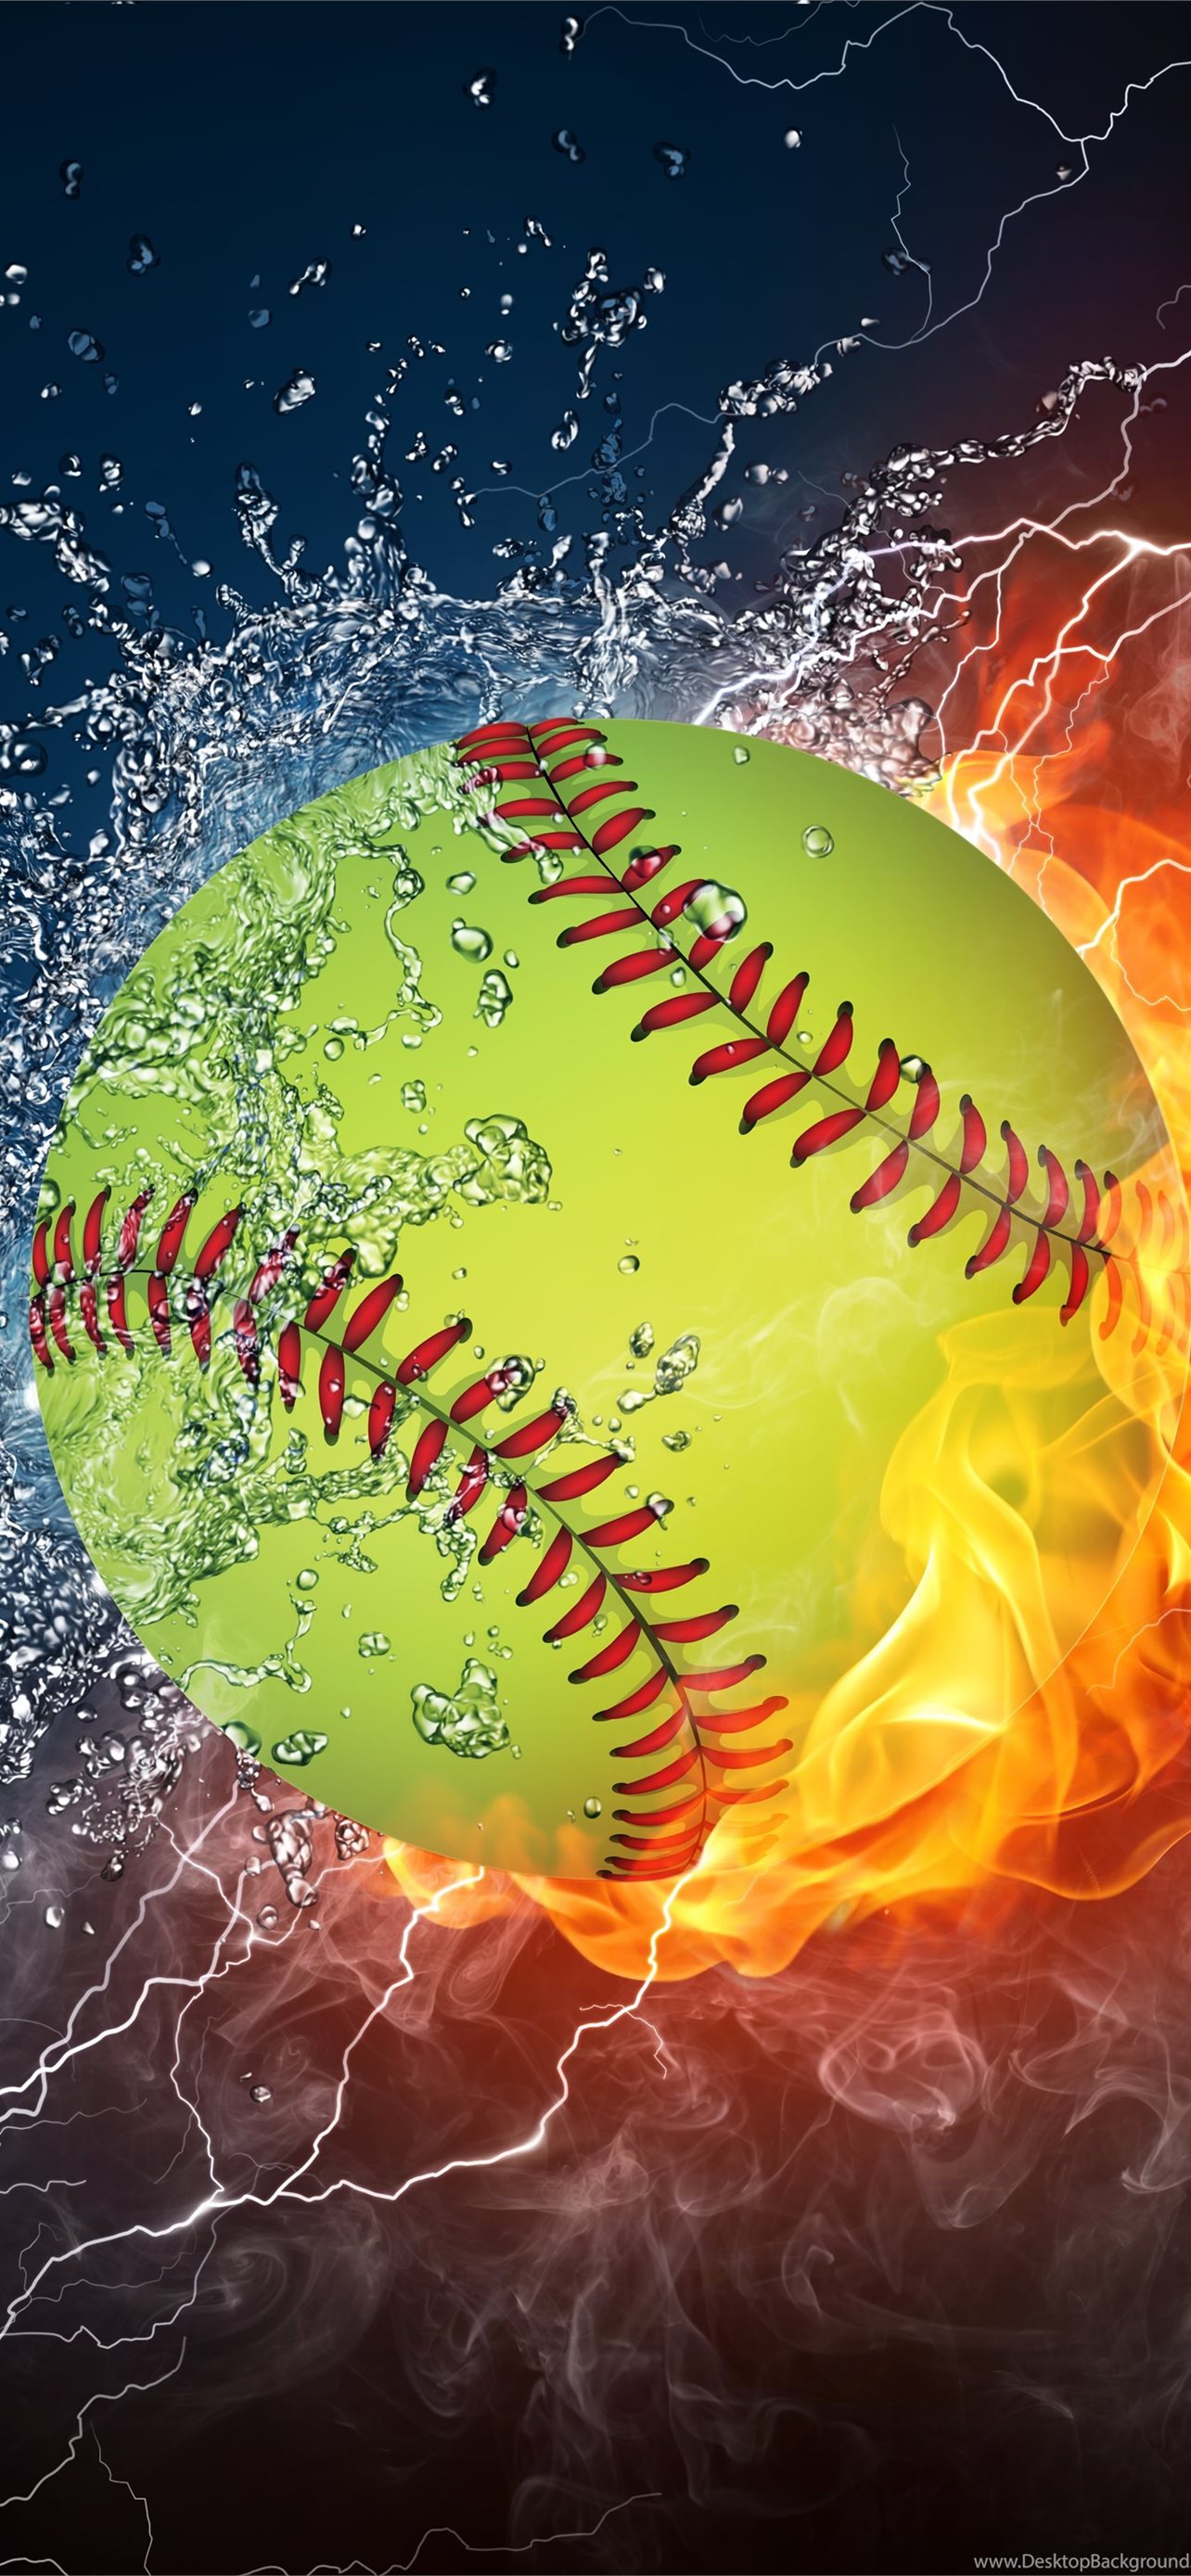 40 about Softball is Life HD phone wallpaper  Pxfuel